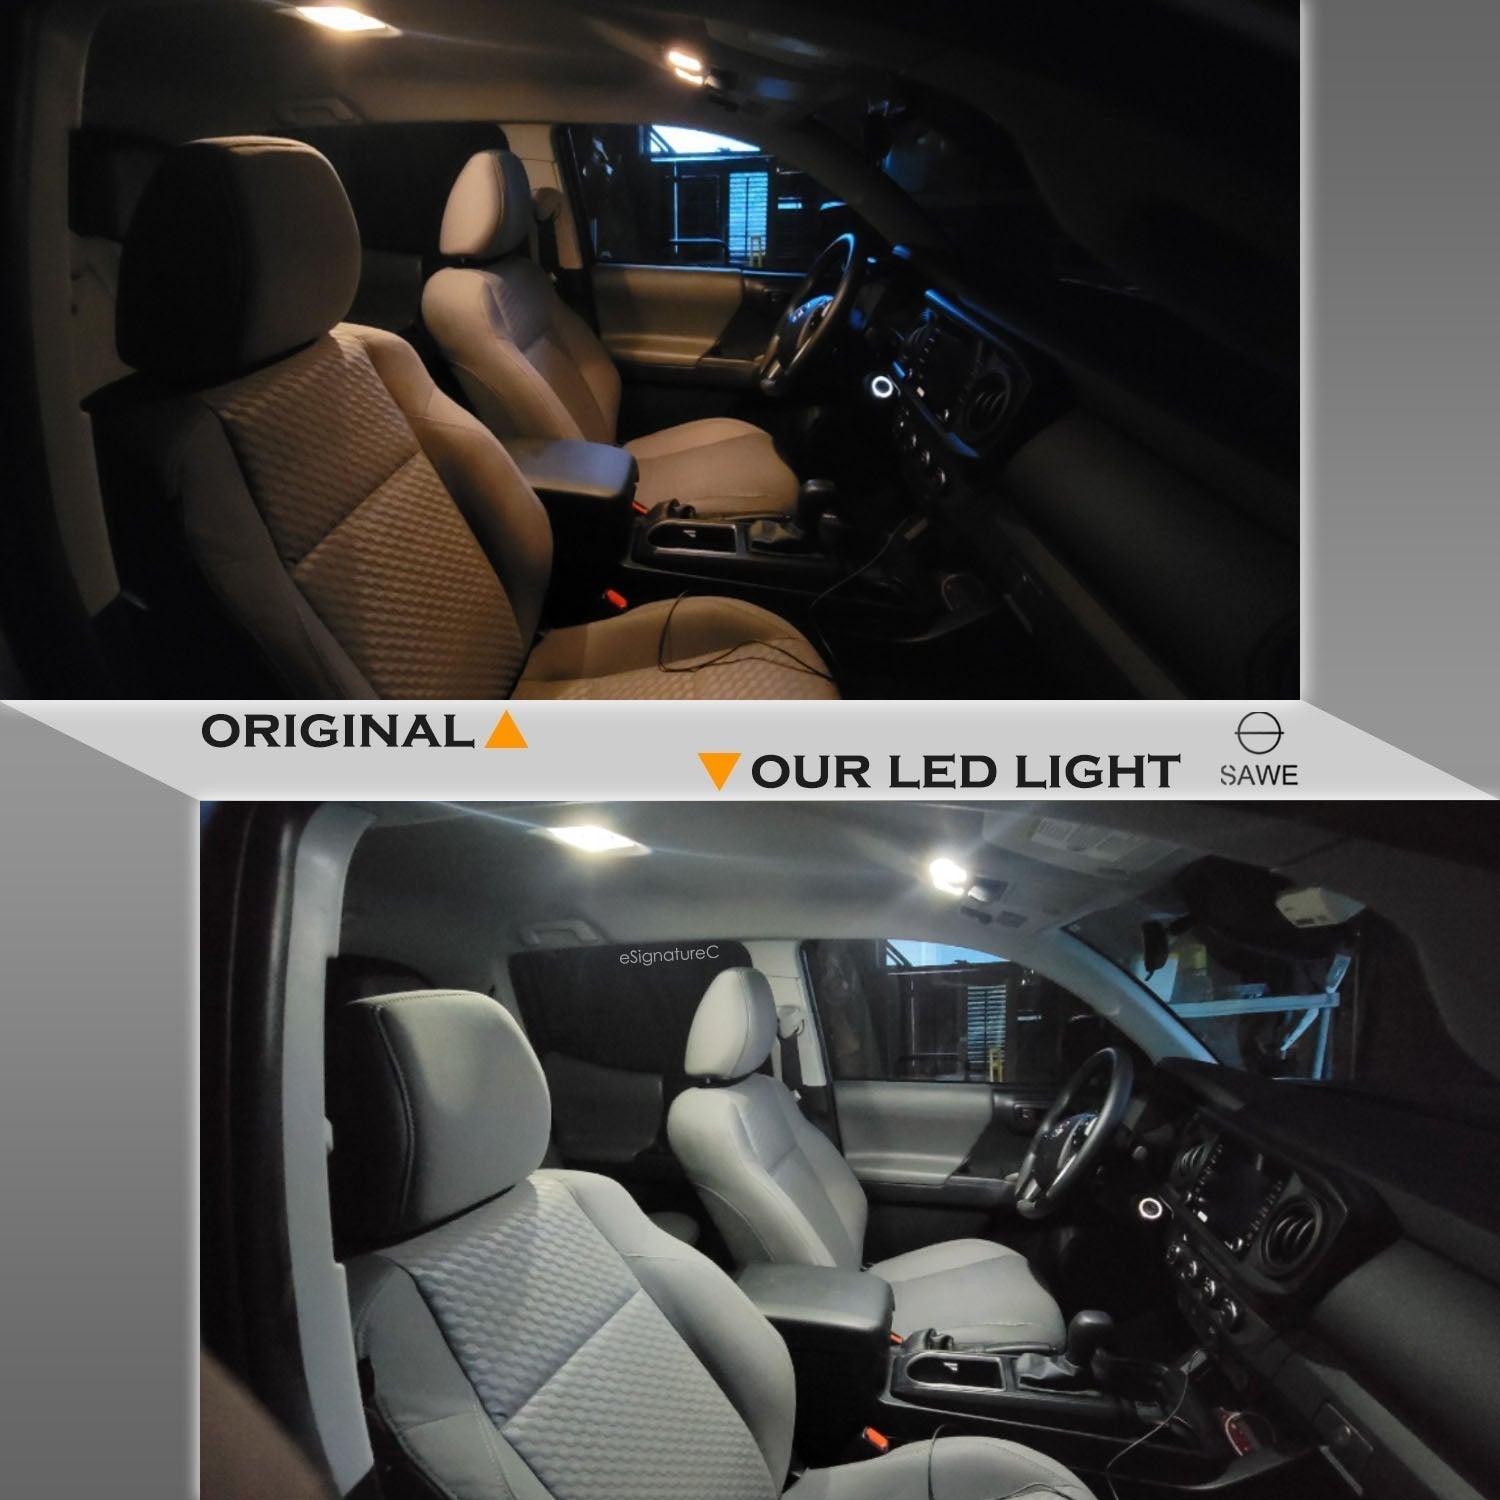 For Acura TL Interior LED Lights - Dome & Map Light Bulbs Package Kit for 2009 - 2014 - White